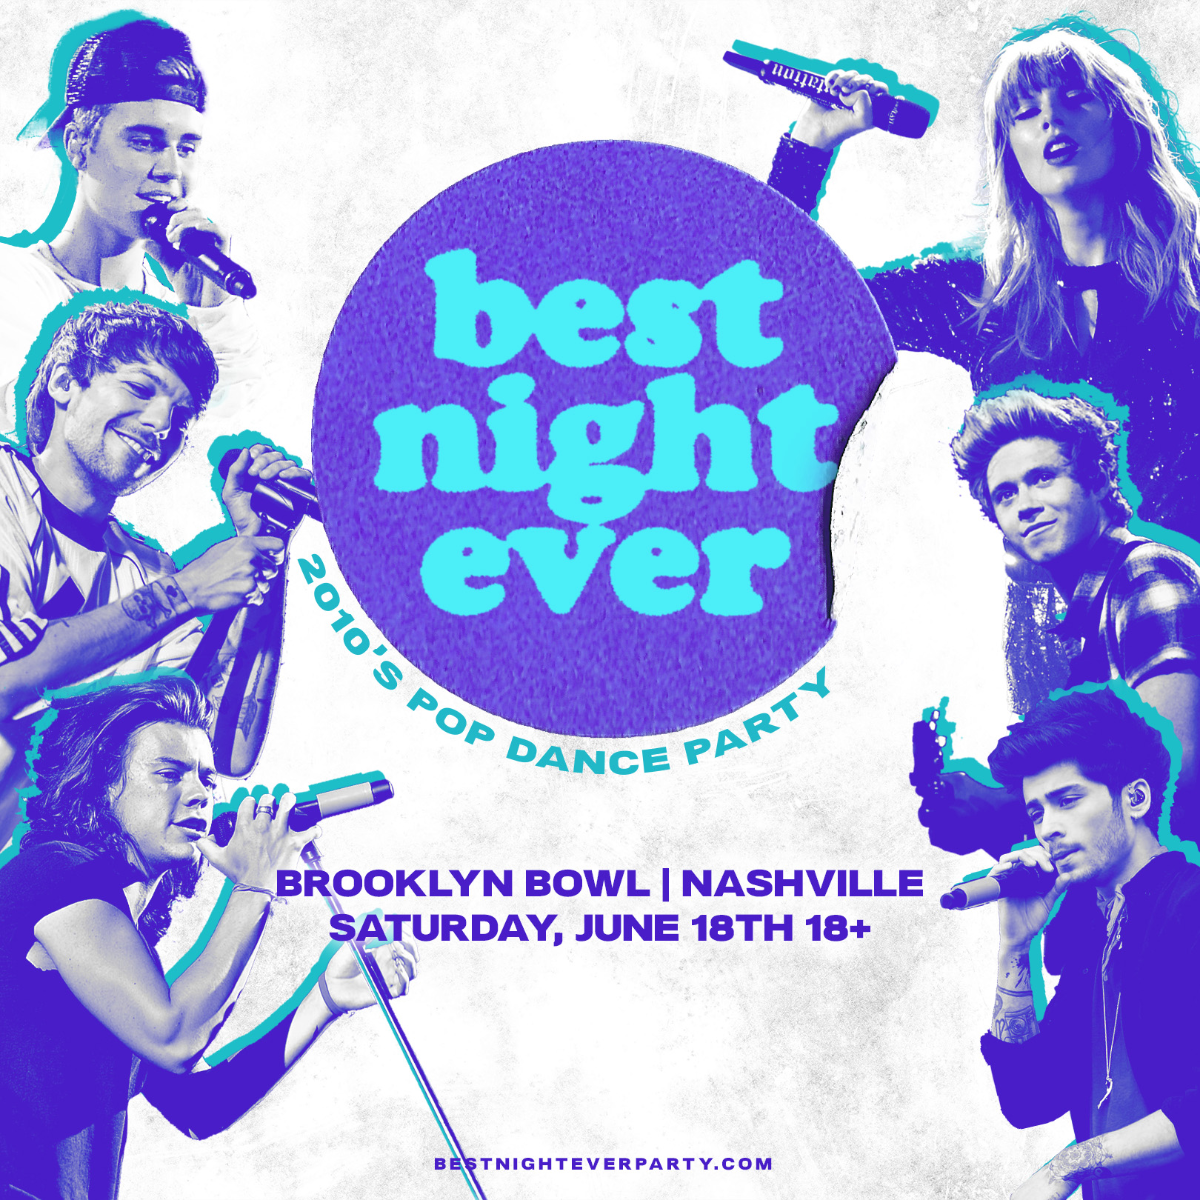 Best Night Ever: 2010's Pop Dance Party inspired by 1D